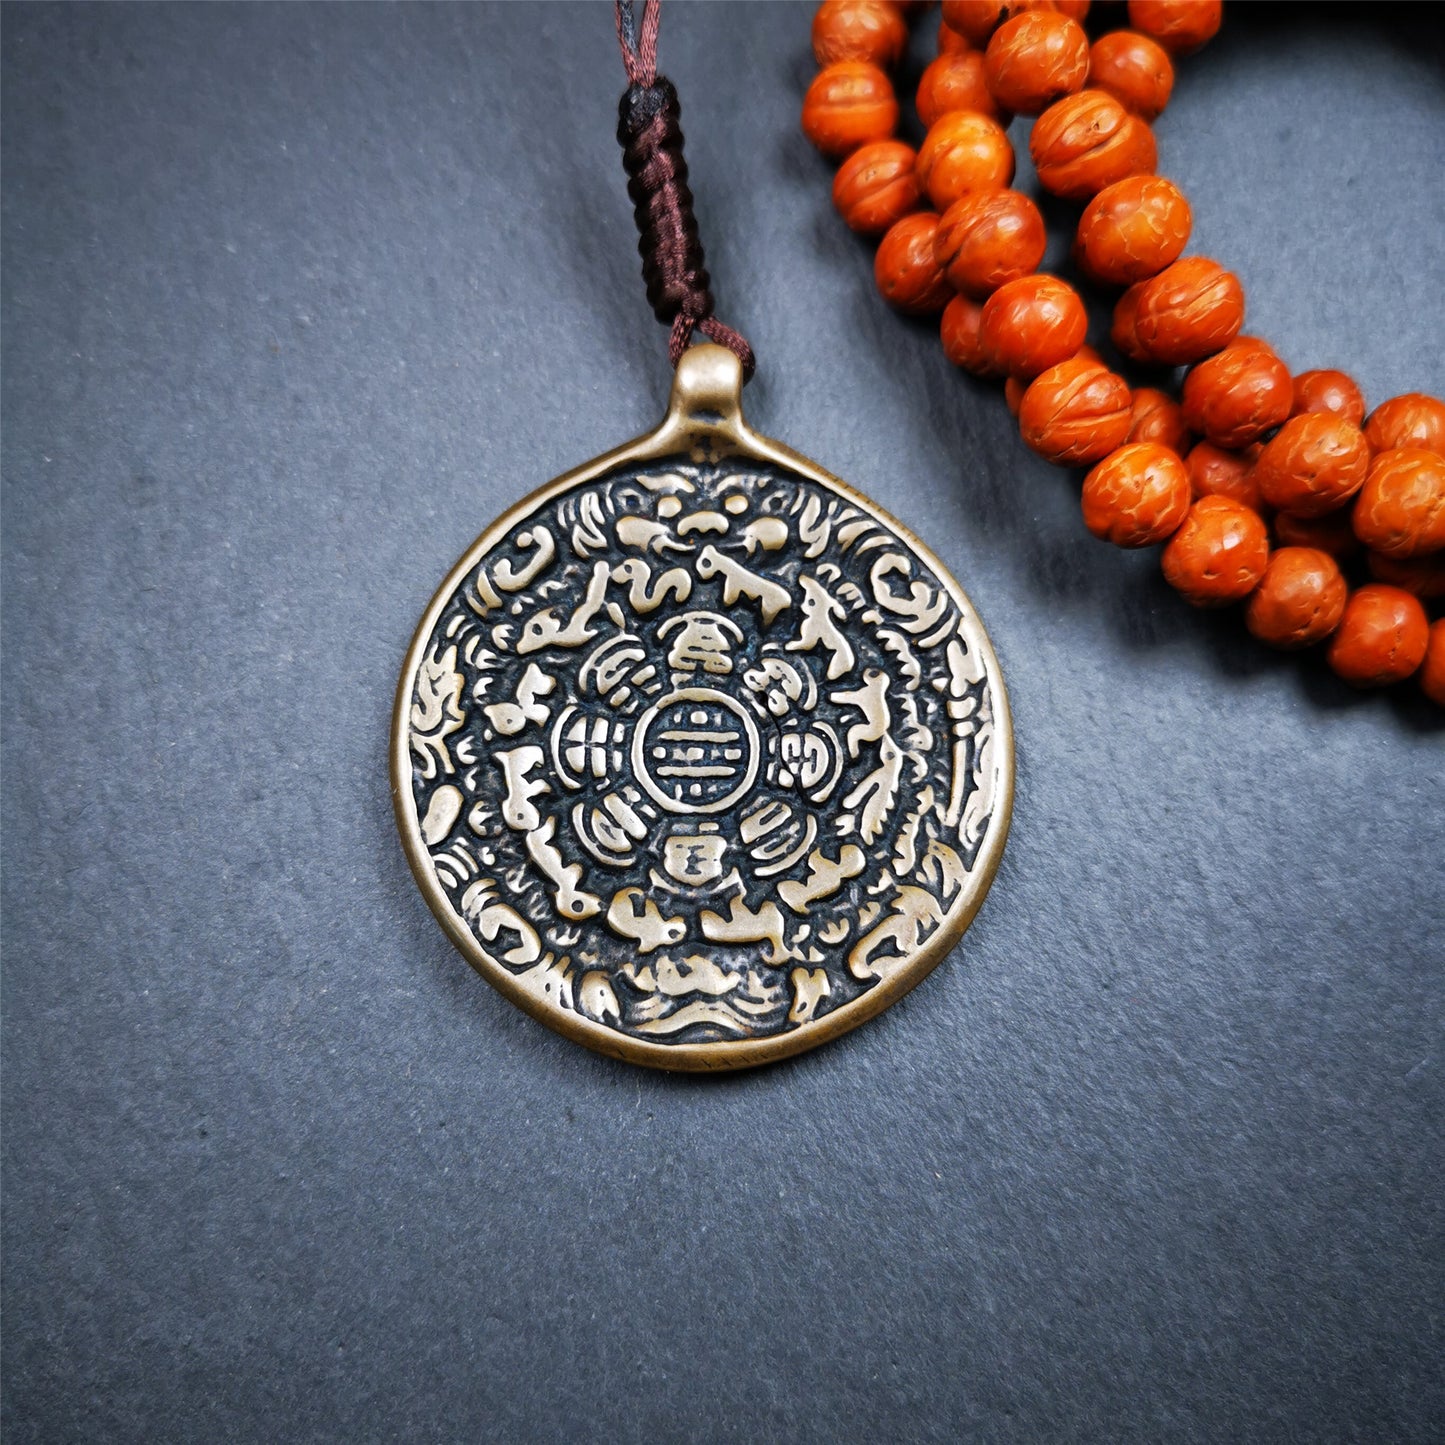 This sipaho badge was made by Tibetan craftsmen and come from Hepo Town, Baiyu County, the birthplace of the famous Tibetan handicrafts. It is round shape,made of brass,1.88".The pattern is Tibetan Budhist Protective Symbol - SIPAHO(srid pa ho).